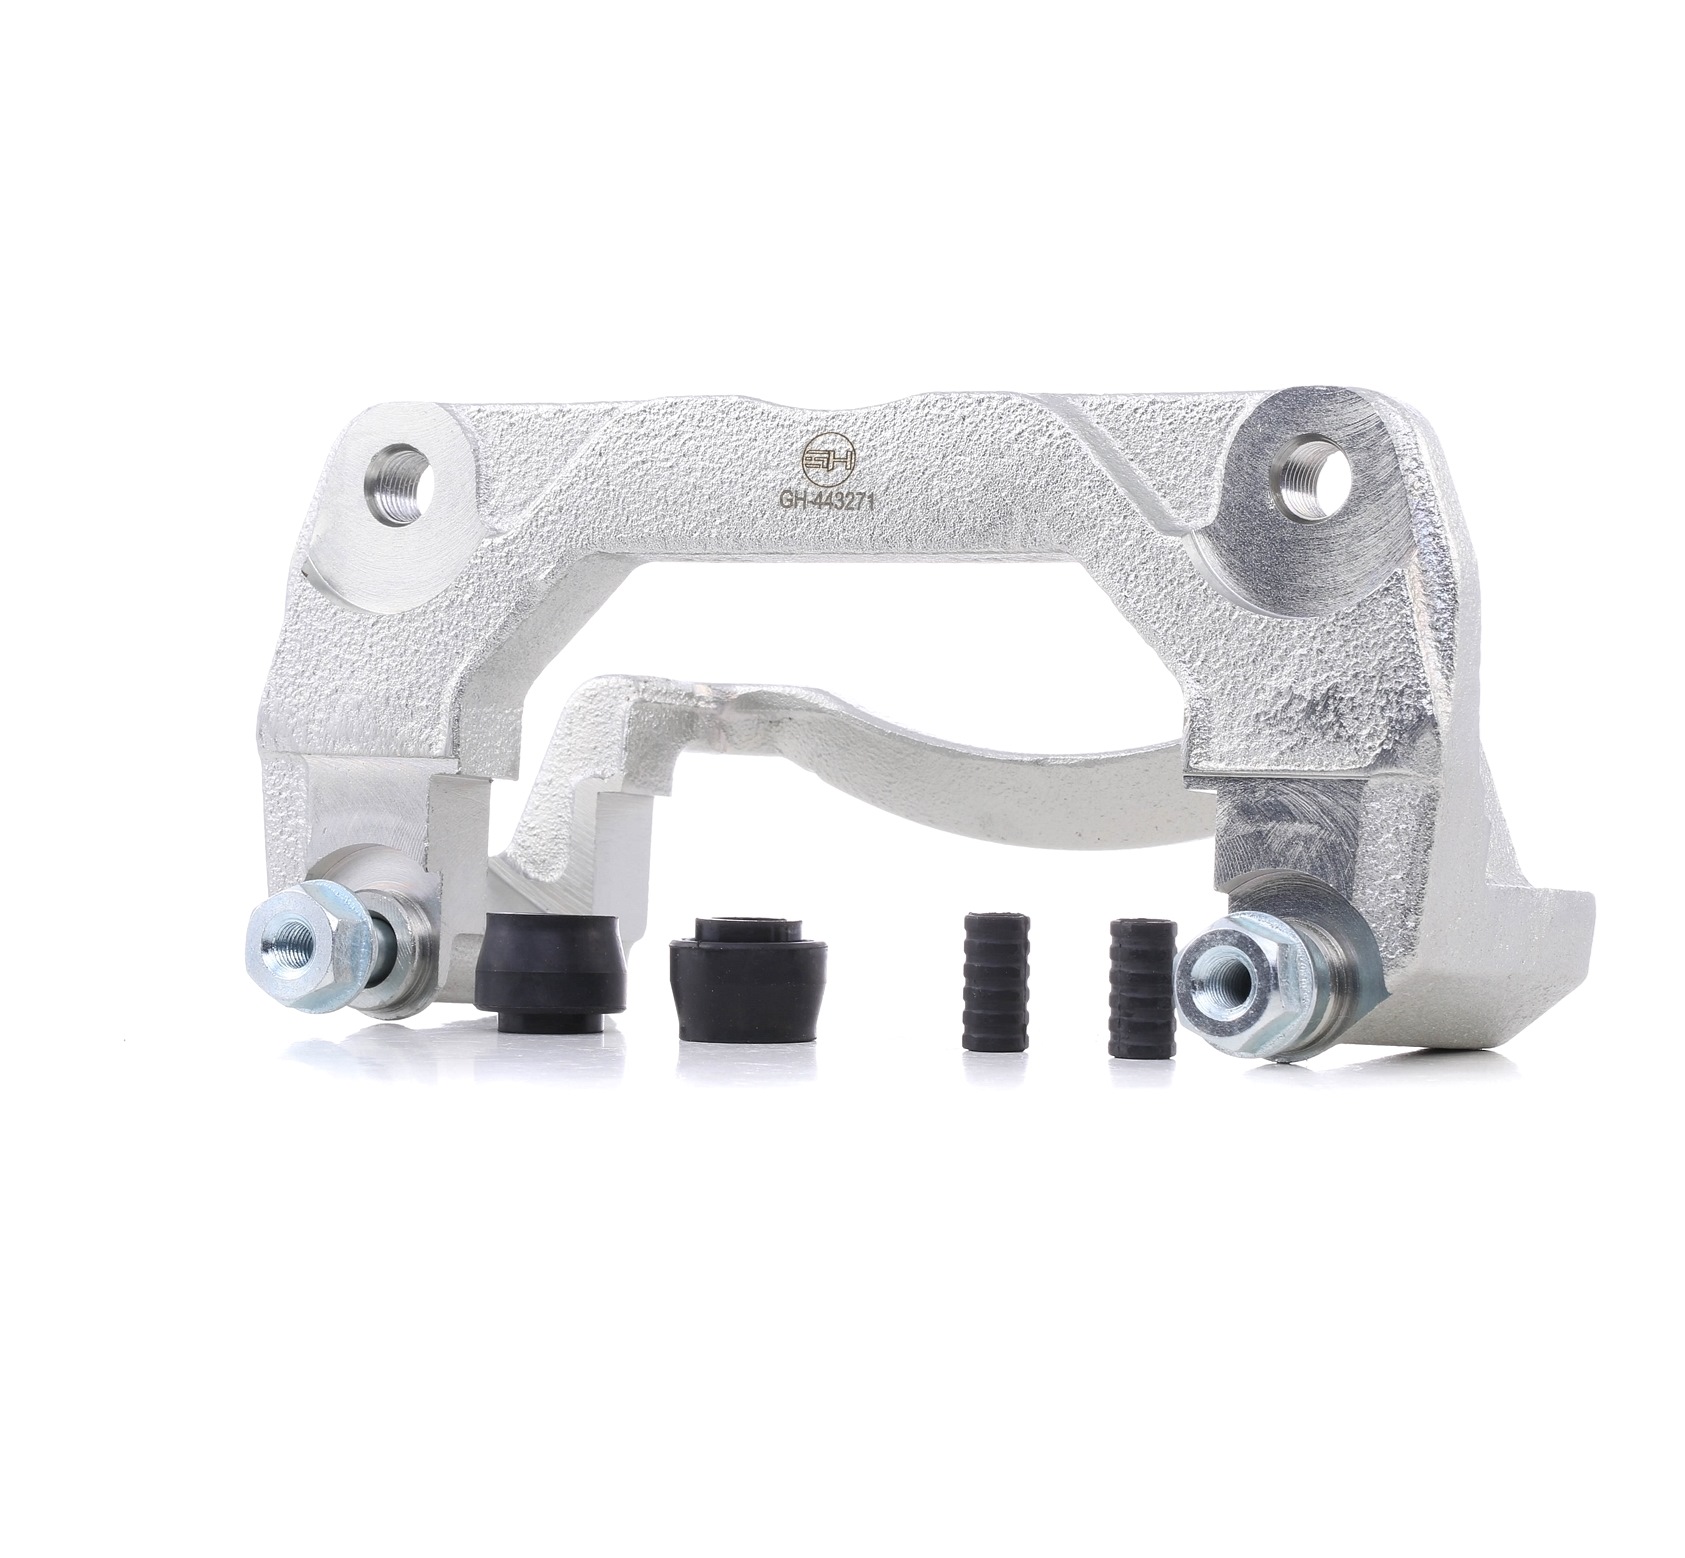 GH GH-443271 Carrier, brake caliper LEXUS experience and price